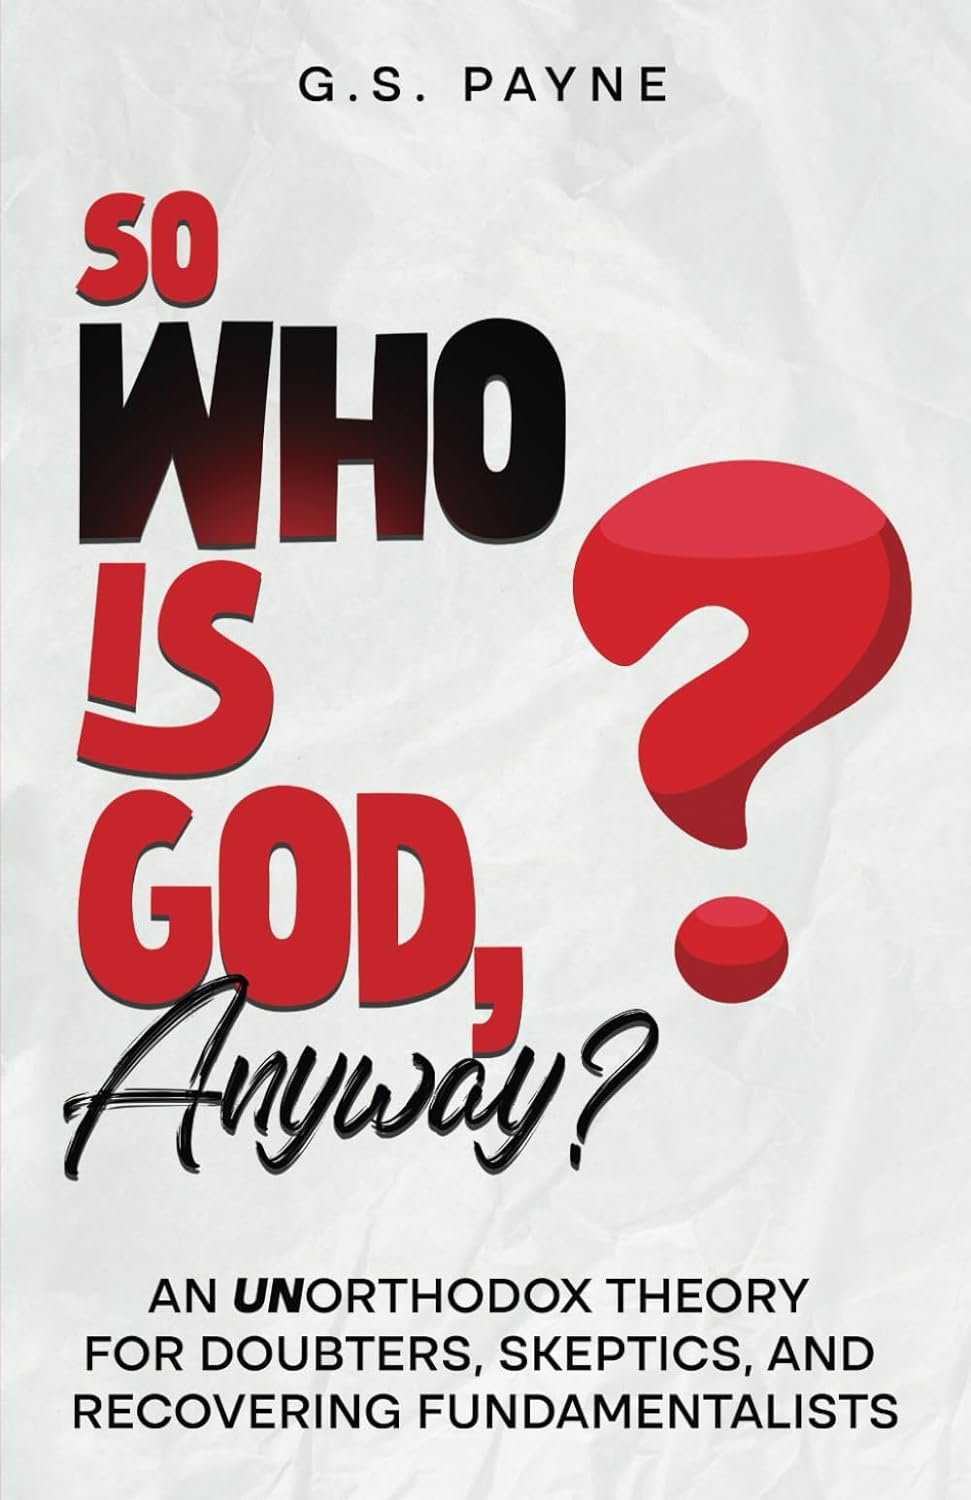 New book "So Who is God, Anyway?" by G.S. Payne is released, a humorous, engaging look at big questions that provides nuanced answers and new perspectives